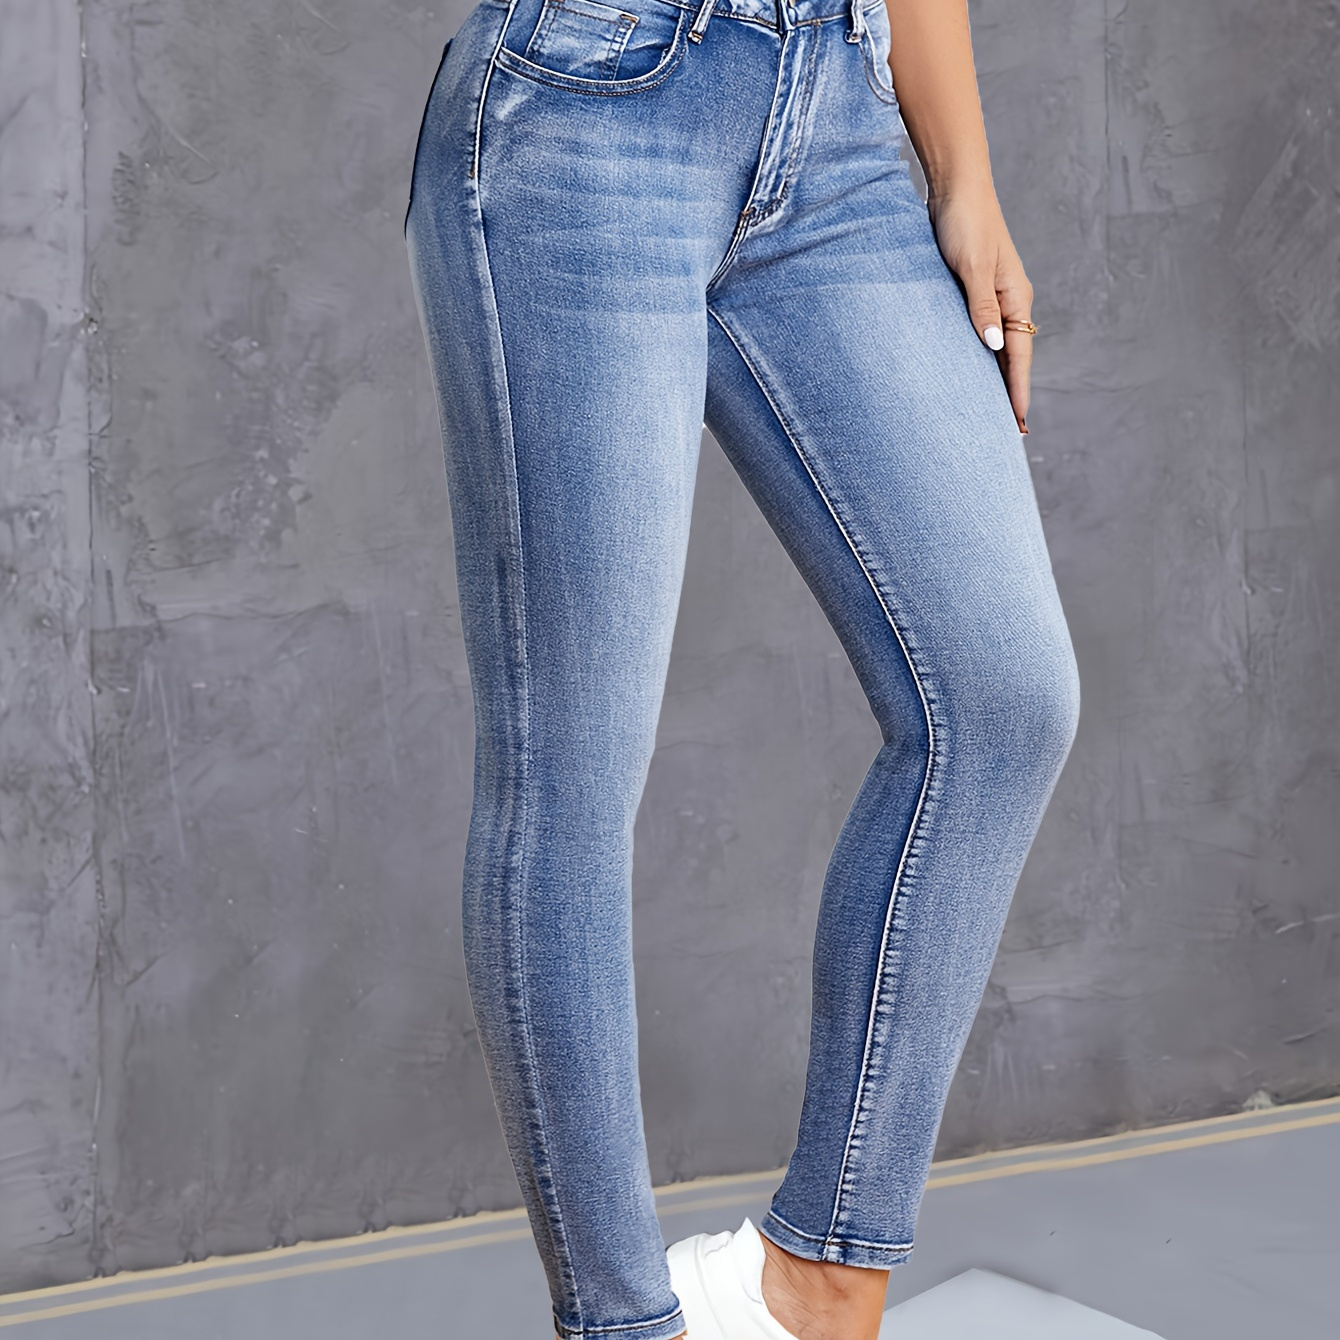 

Women's Fashionable Plain Blue Elastic High-waist Skinny Jeans, Slim Fit Ankle-length Denim Pants, Casual Preppy Style - Perfect For Fall & Winter